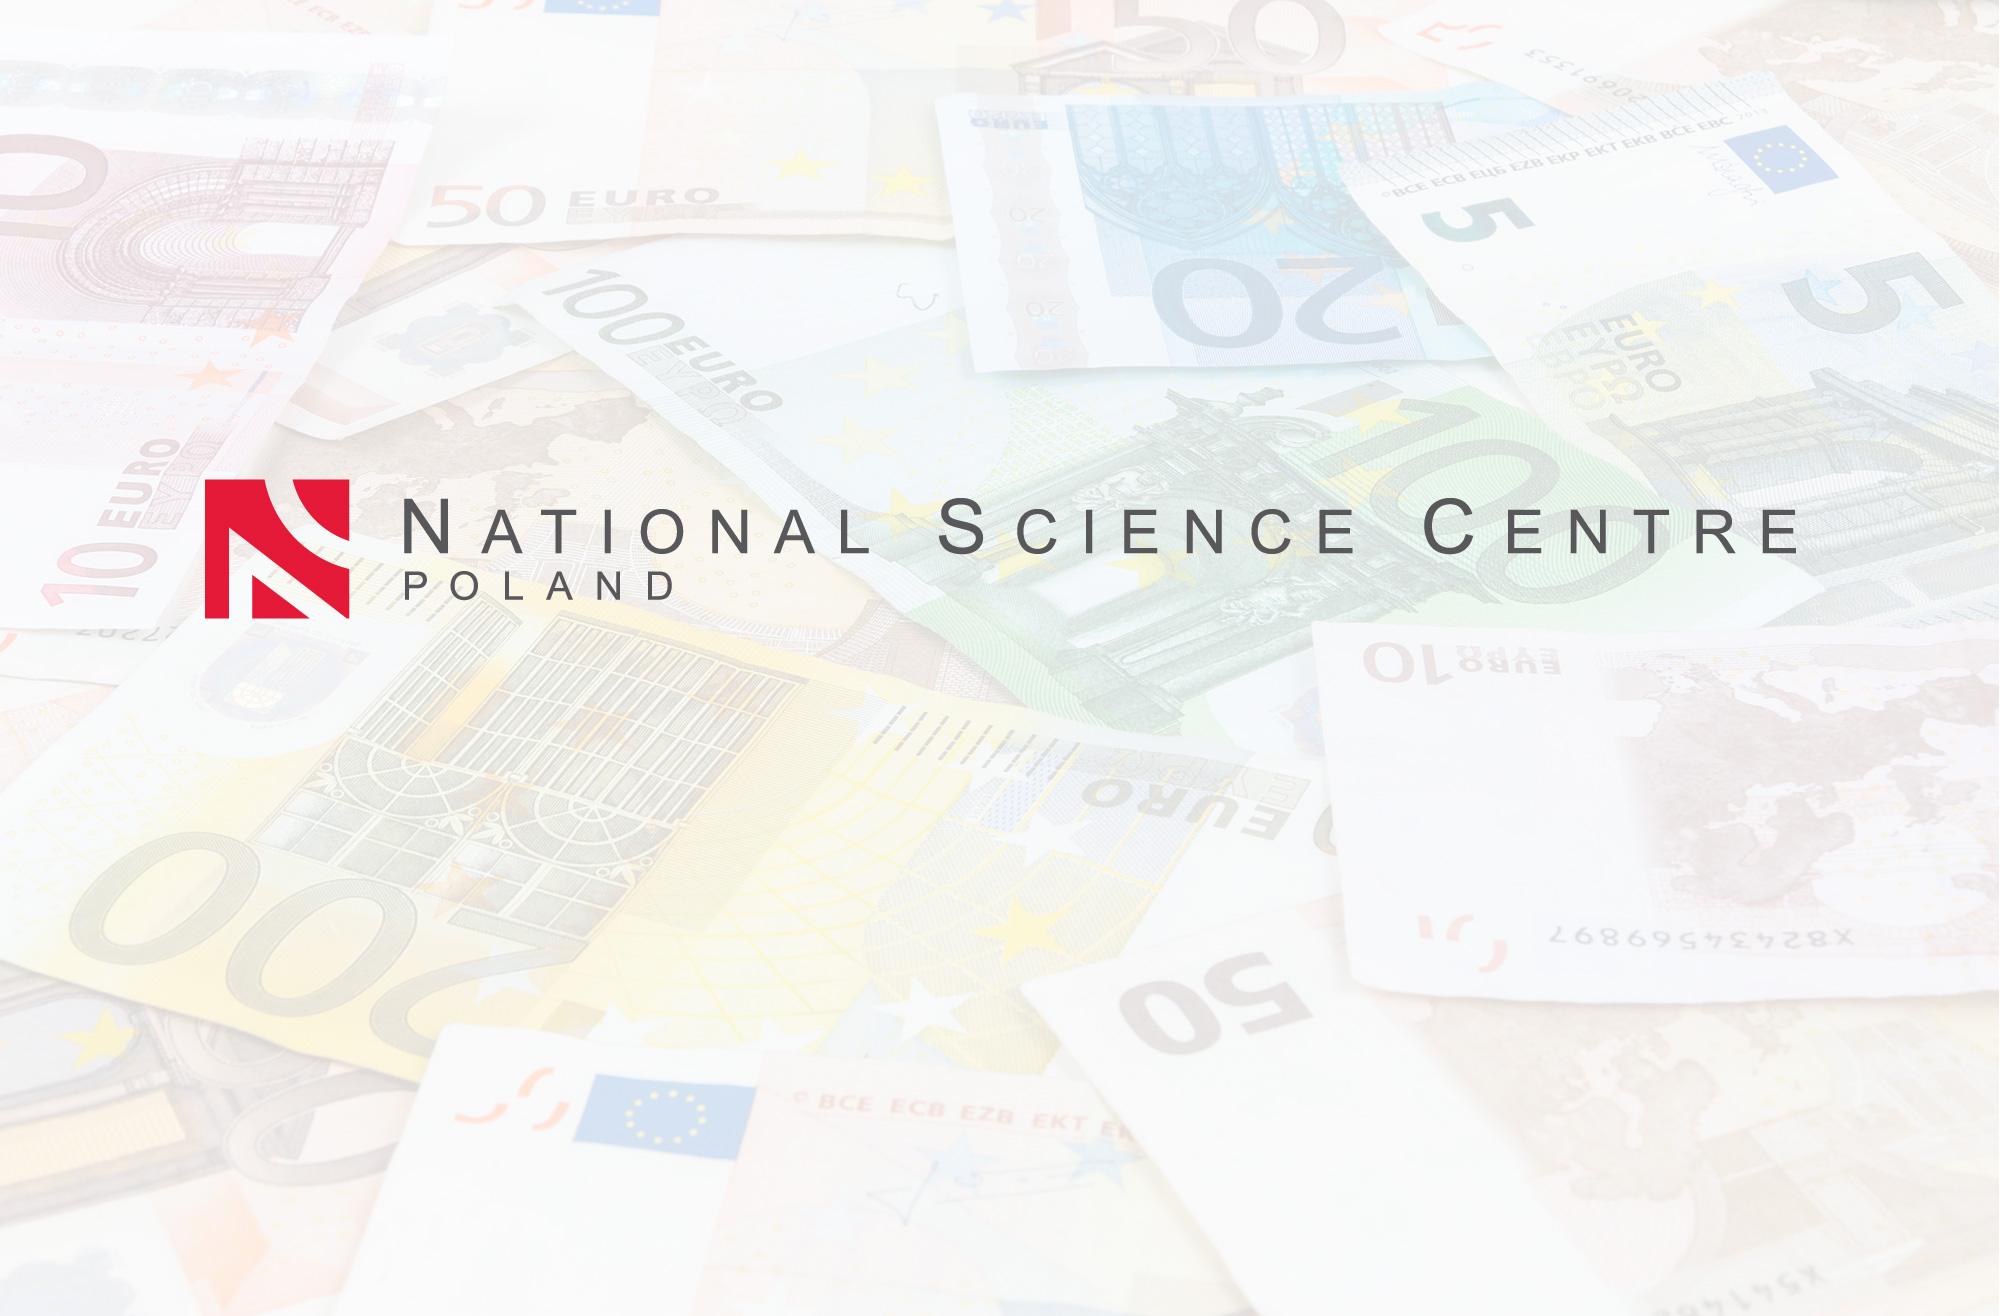 Among Top Recipients of Grants from the National Science Centre